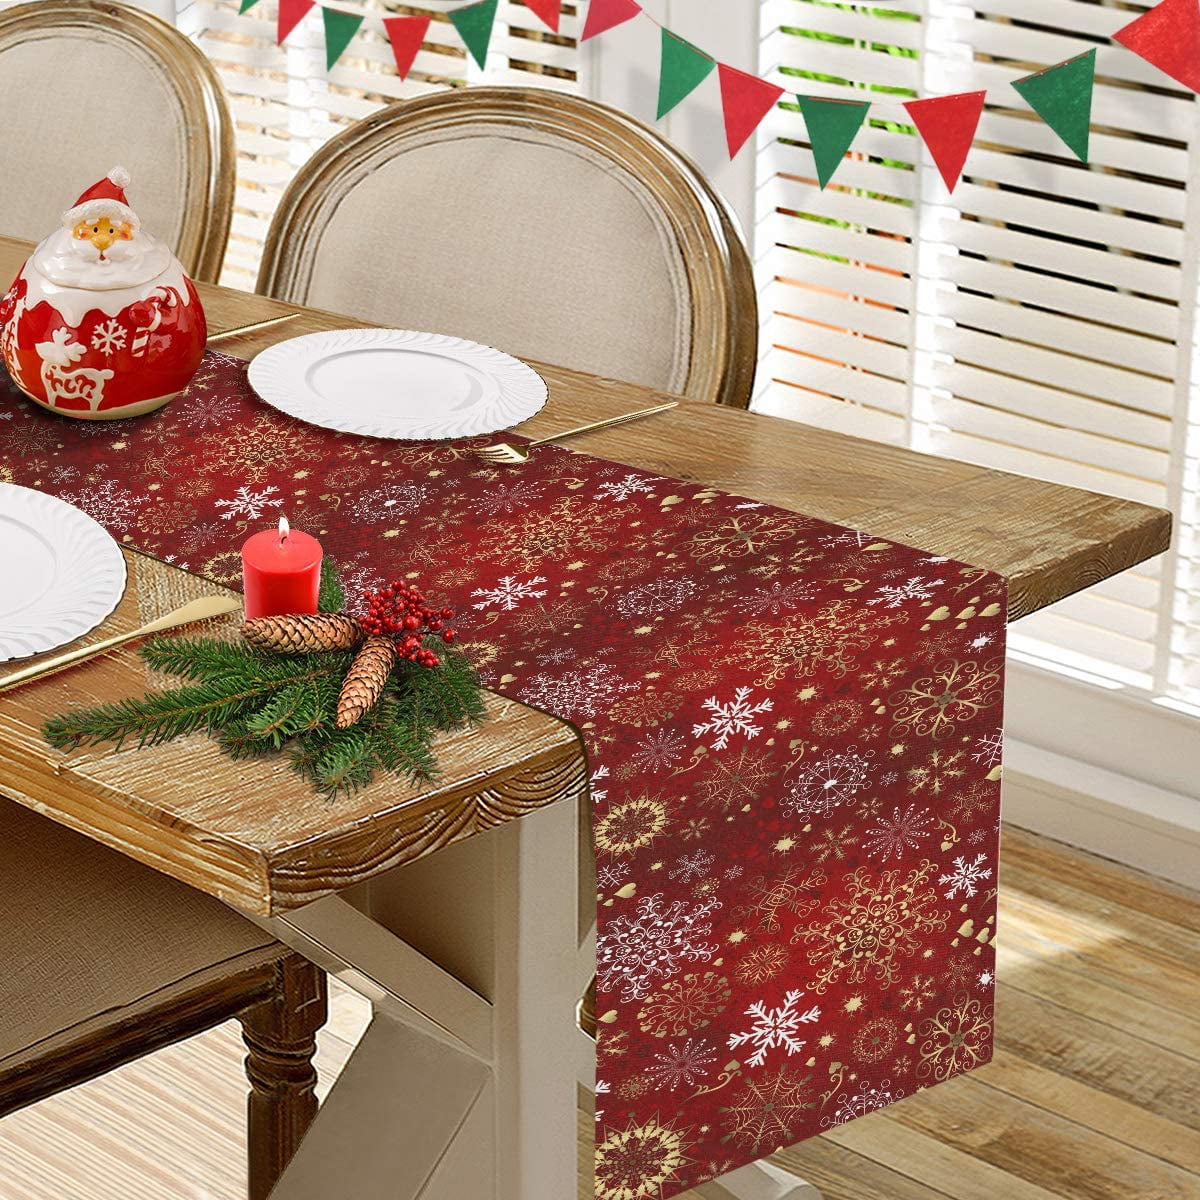 N/A Snowflake1 Table Runner Decor Kitchen Dining Table Decorations for Home Party Indoor Outdoor 14 X 36 Inch